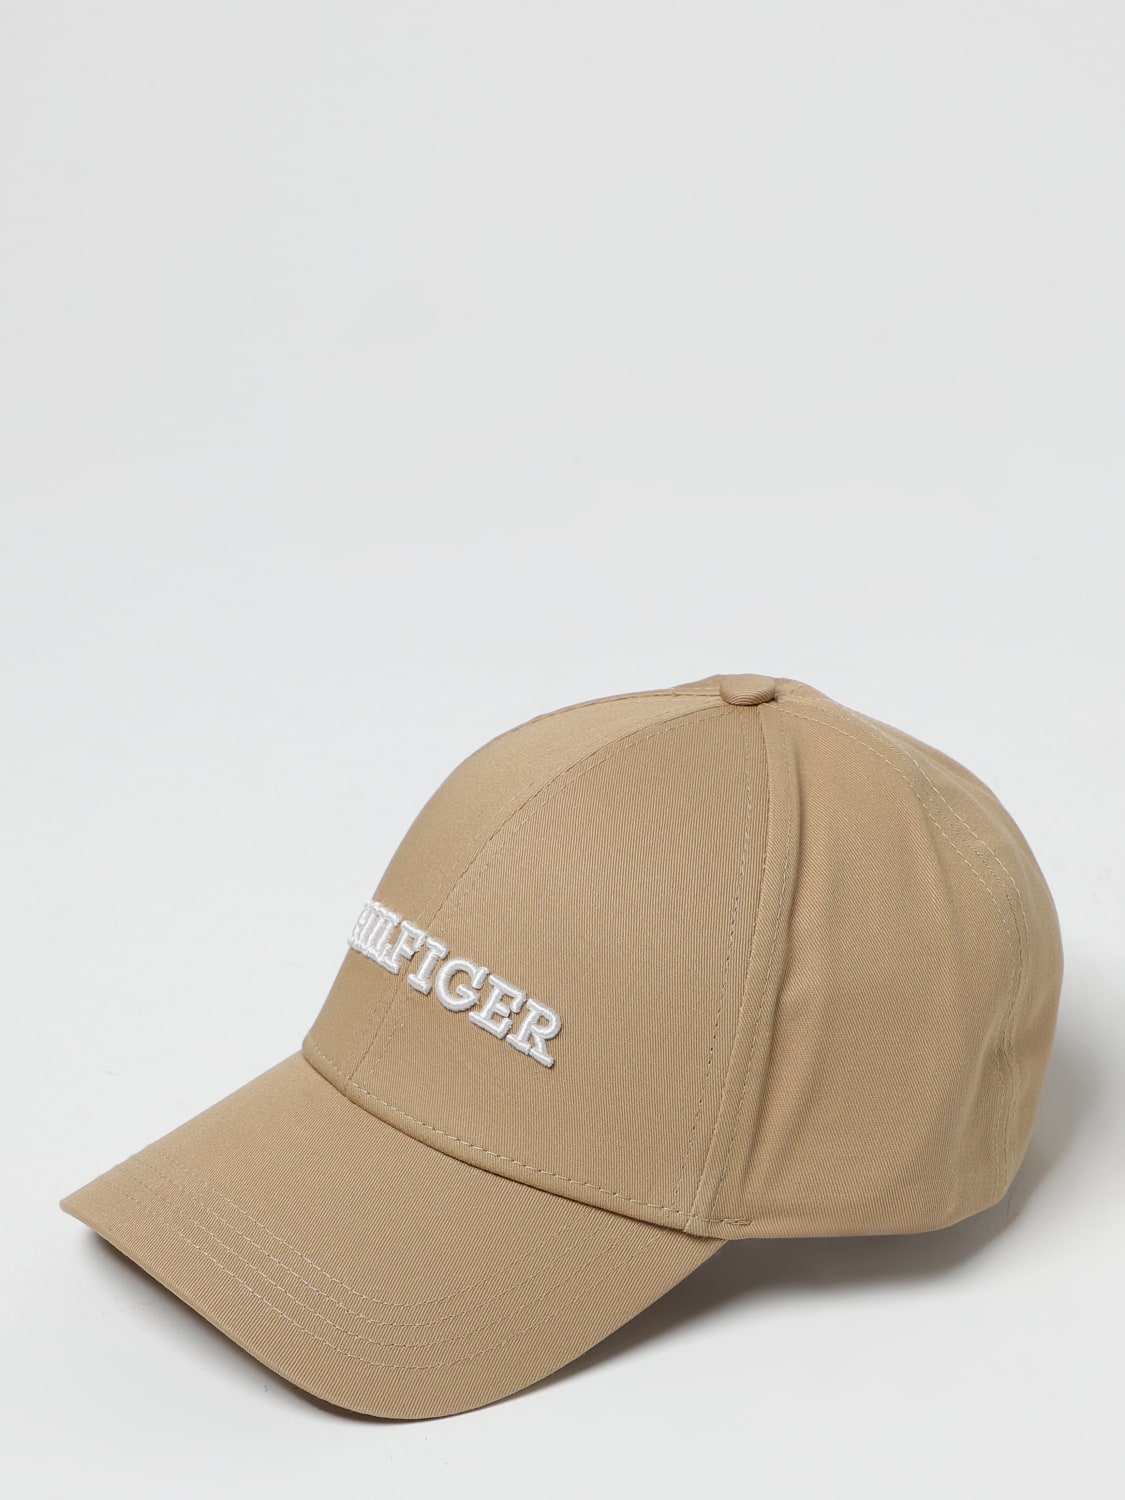 cotton Tommy in hat Beige with Hilfiger - HILFIGER: | hat AW0AW15532 logo embroidered at online TOMMY